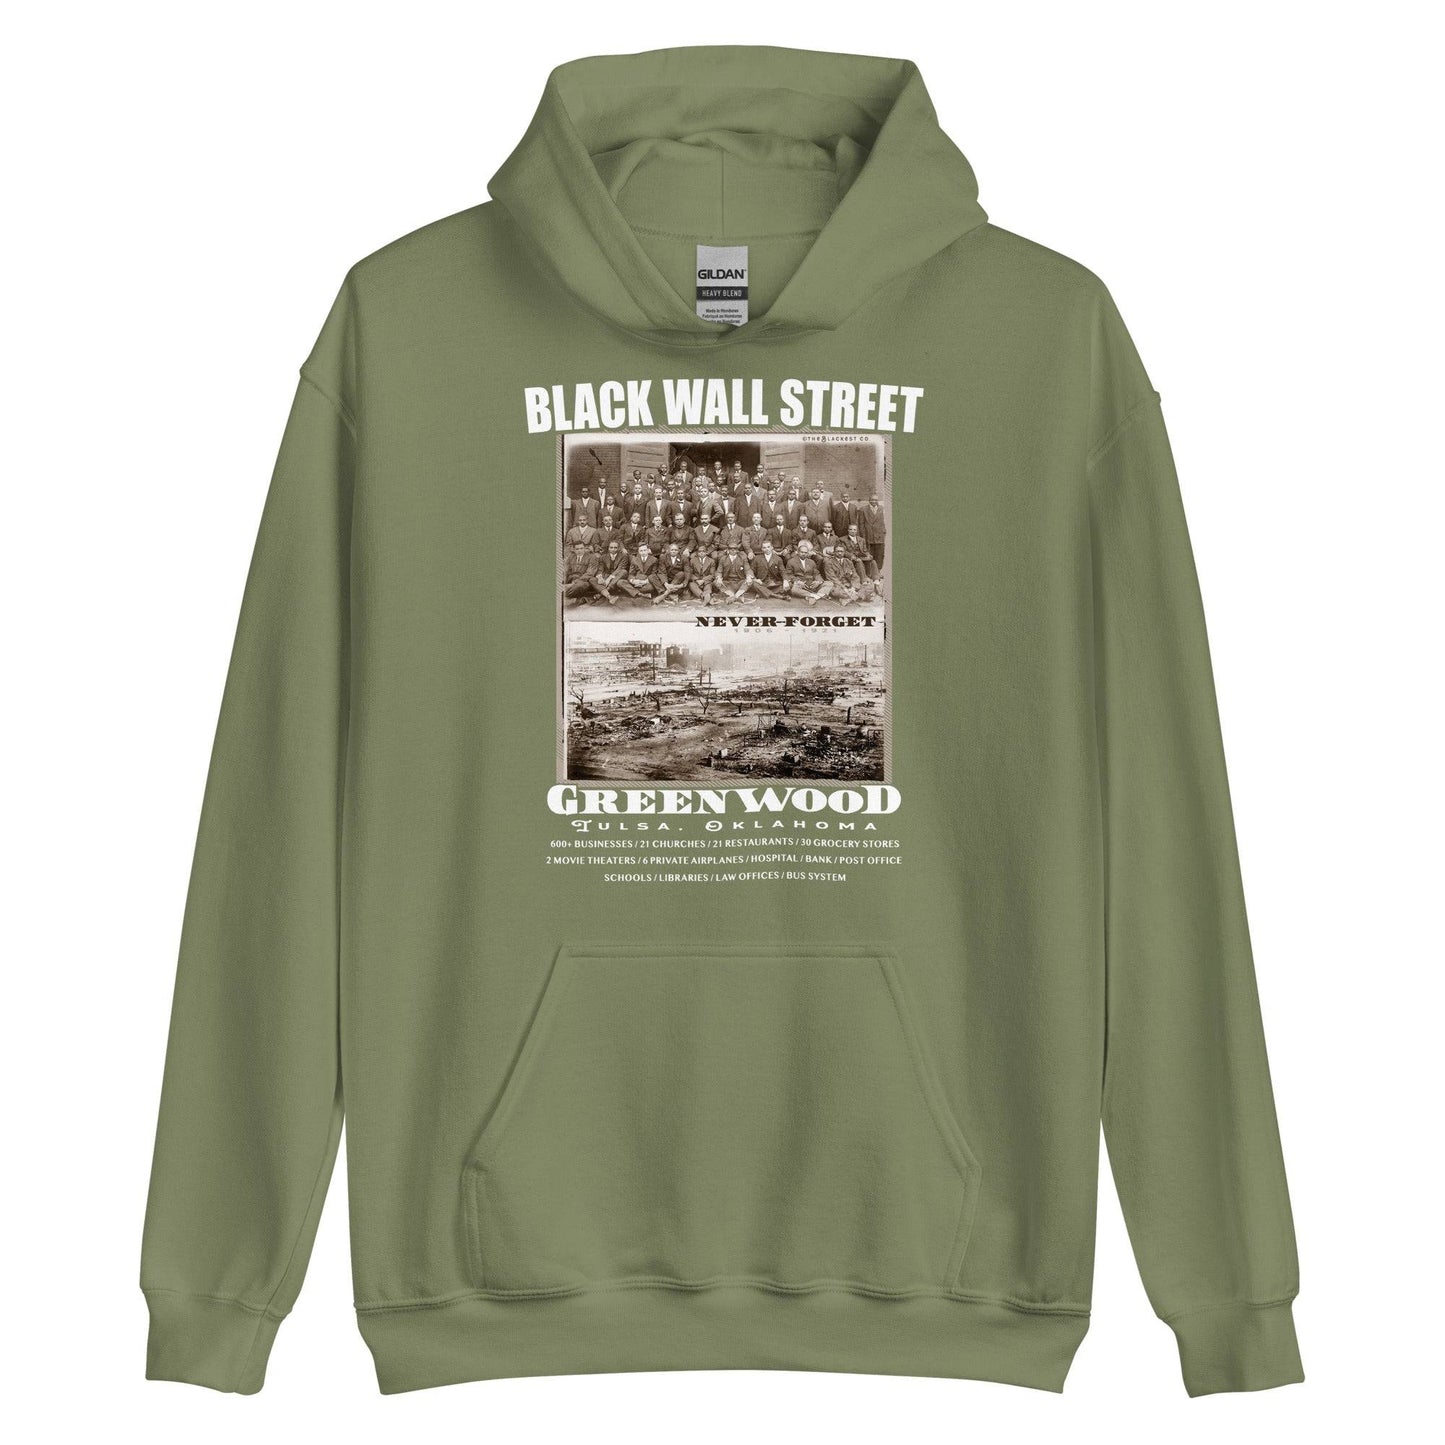 army green pullover hoodie with writing that says Black Wall Street and Greenwood